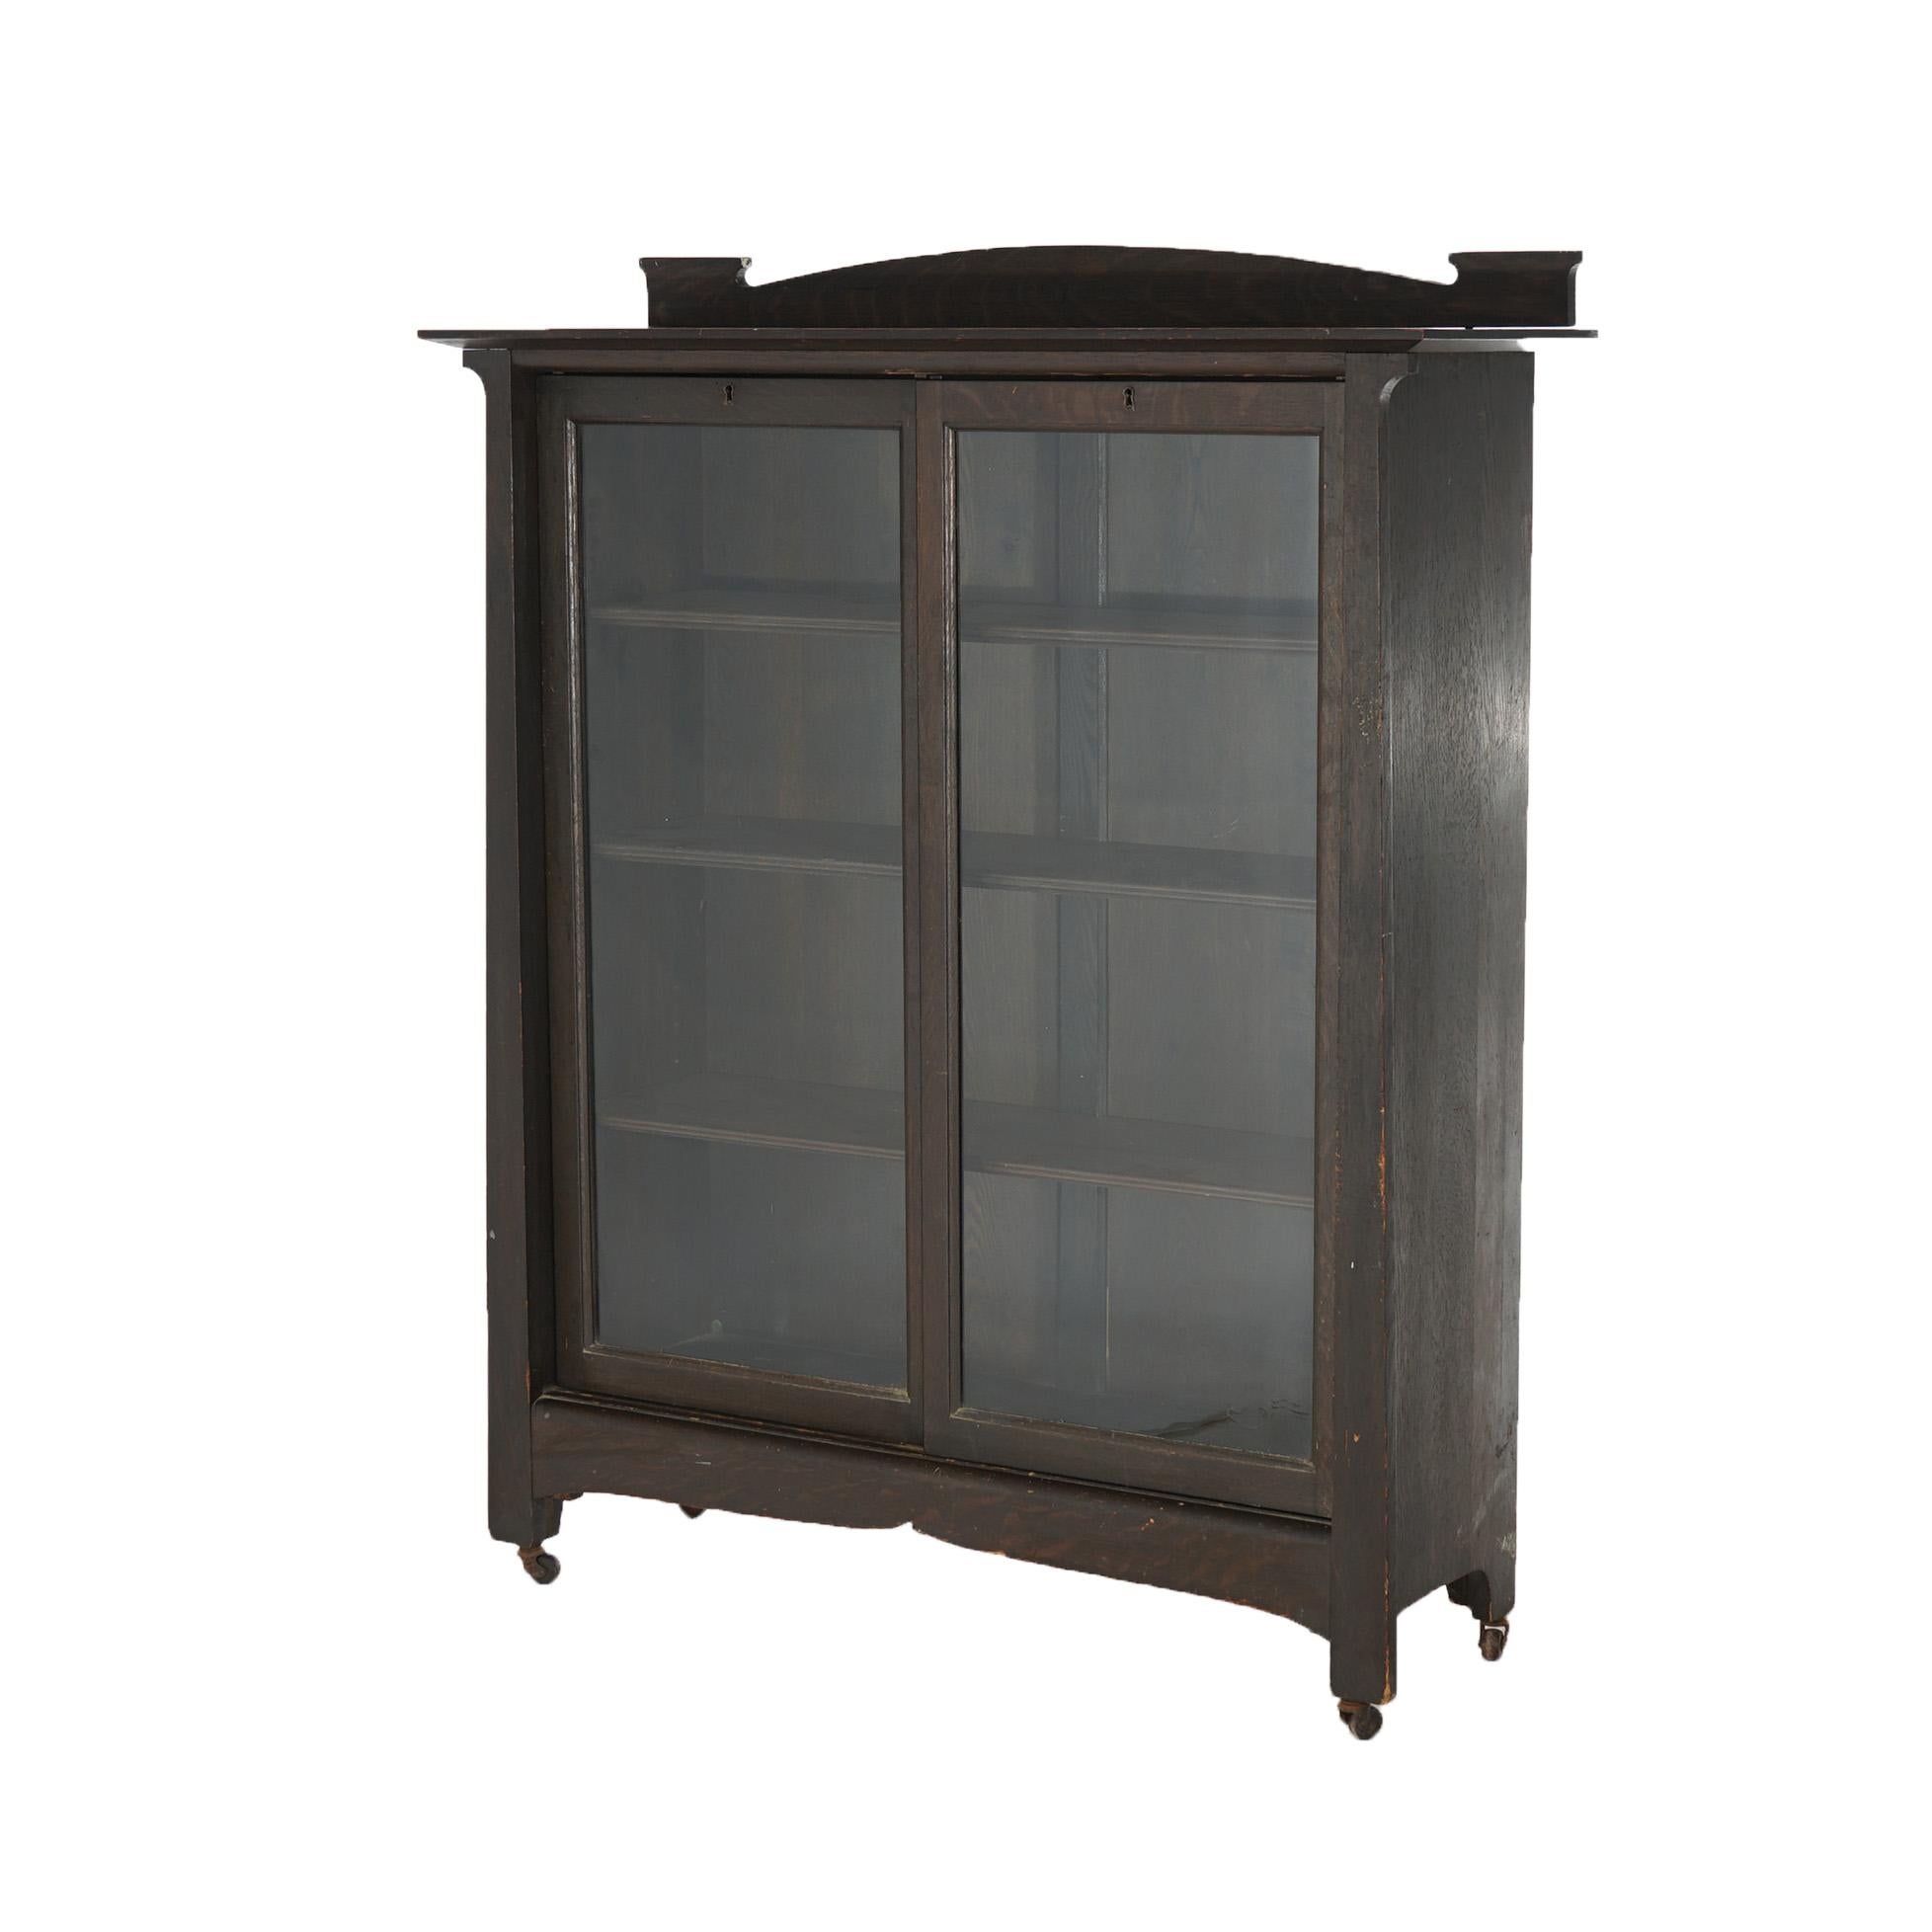 An antique Arts and Crafts Mission bookcase offers arched backsplash over case with sliding glass doors opening to shelved interior, c1910

Measures - 51.5